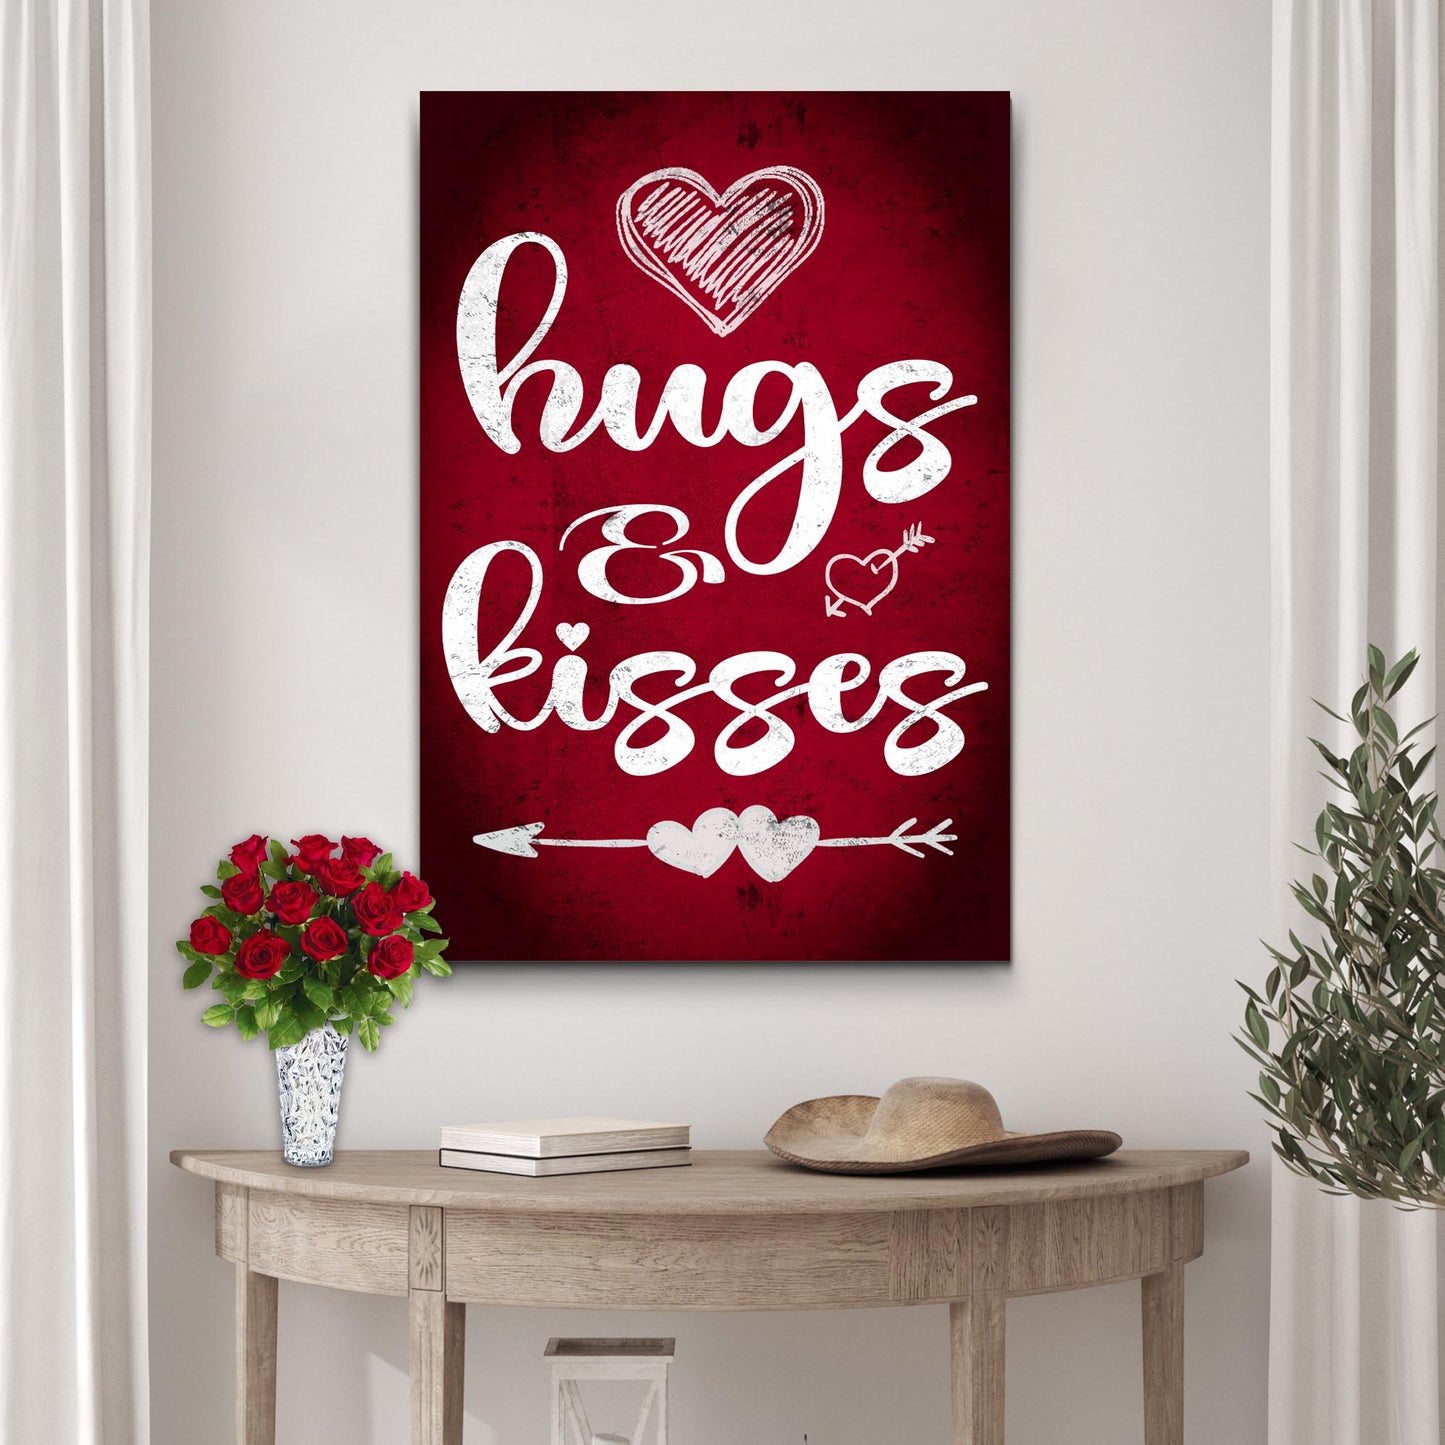 Hugs and Kisses Sign - Image by Tailored Canvases